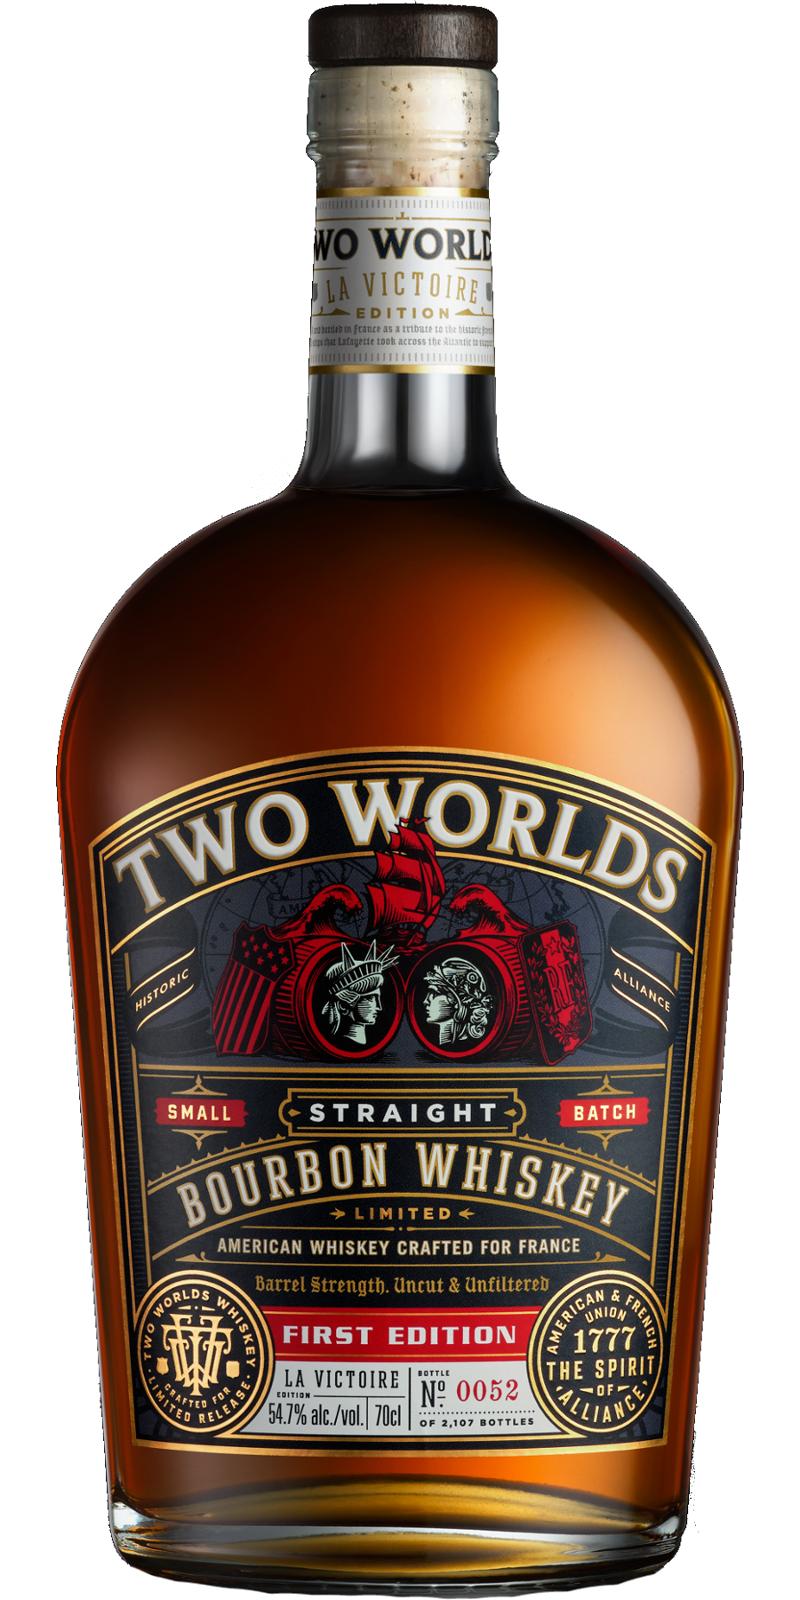 Top 10 Best Selling American Whiskey Brands of 2022 by 'Drinks